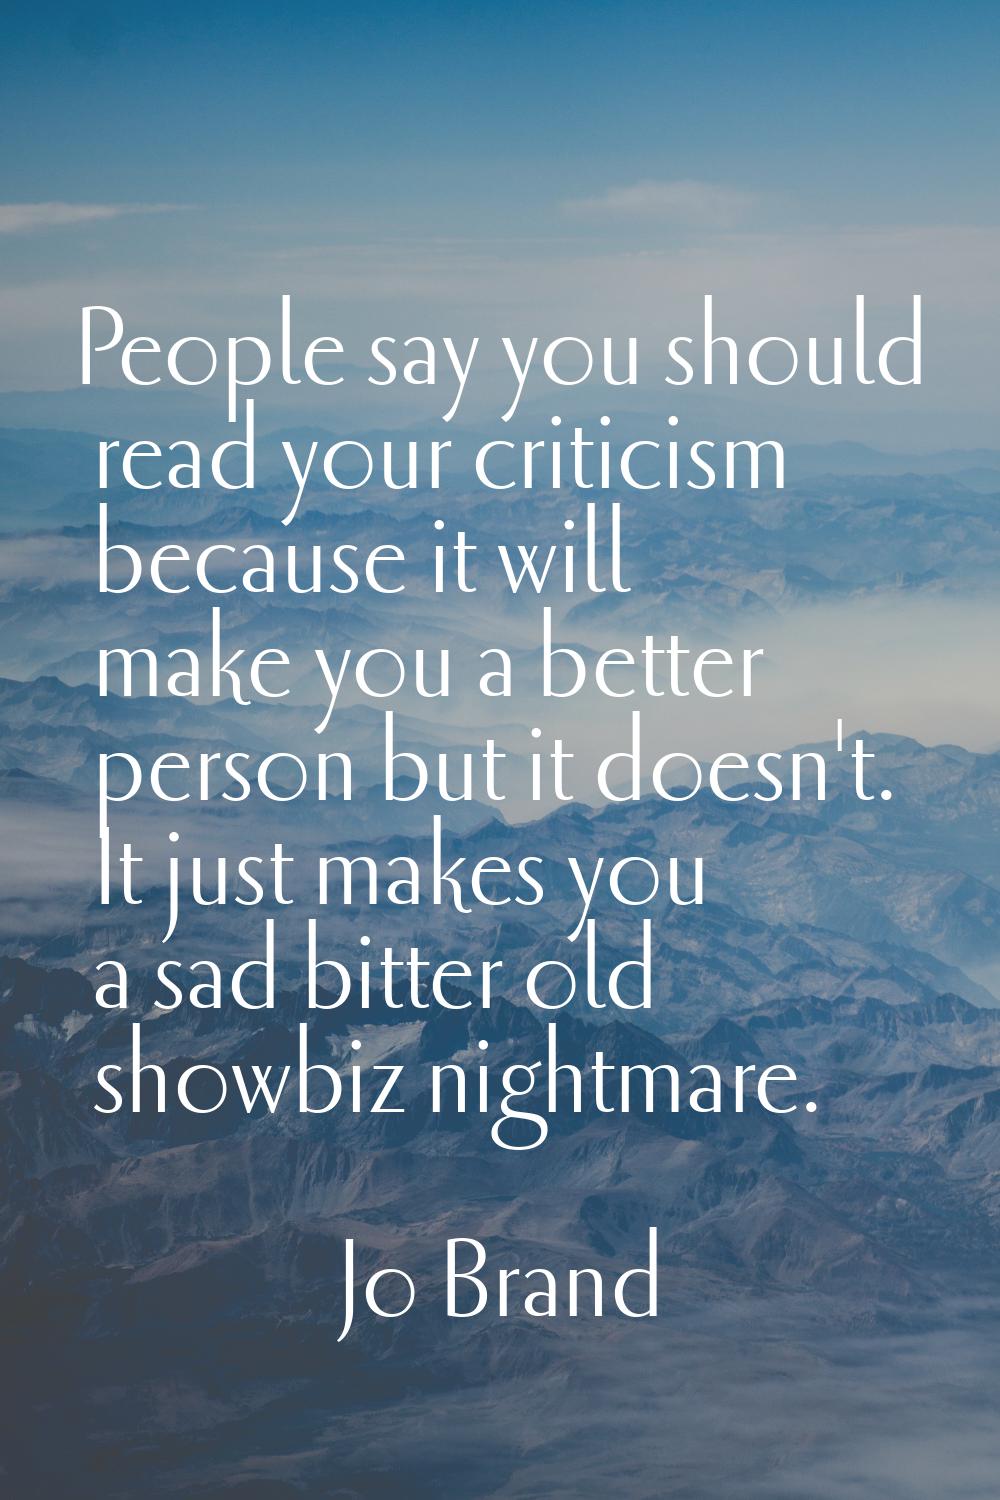 People say you should read your criticism because it will make you a better person but it doesn't. 